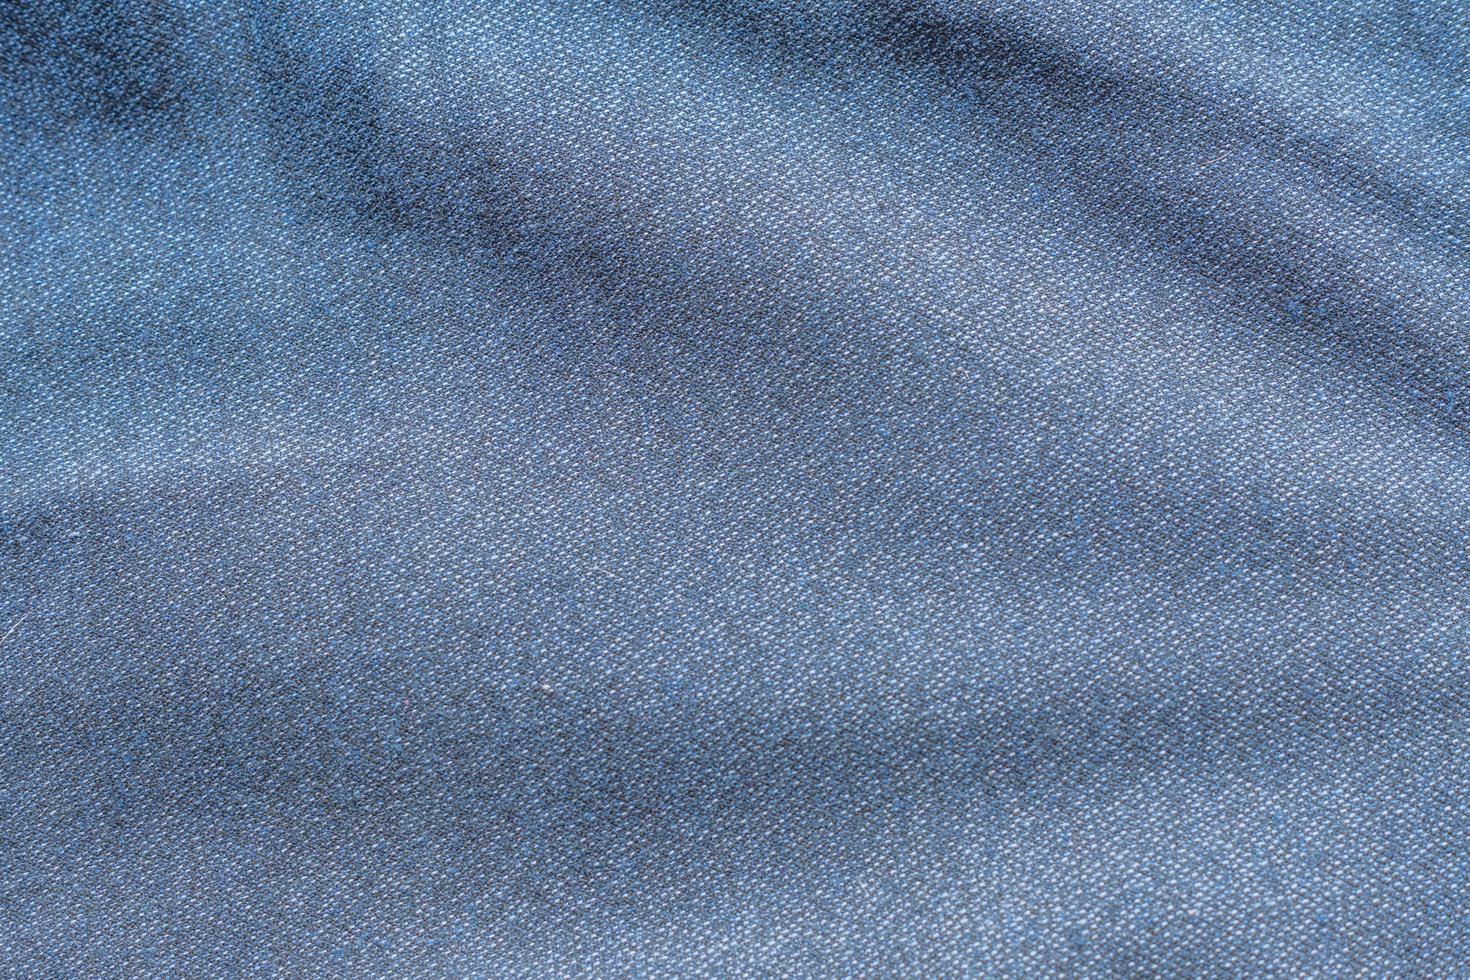 knitted blue fabric background 9977974 Stock Photo at Vecteezy